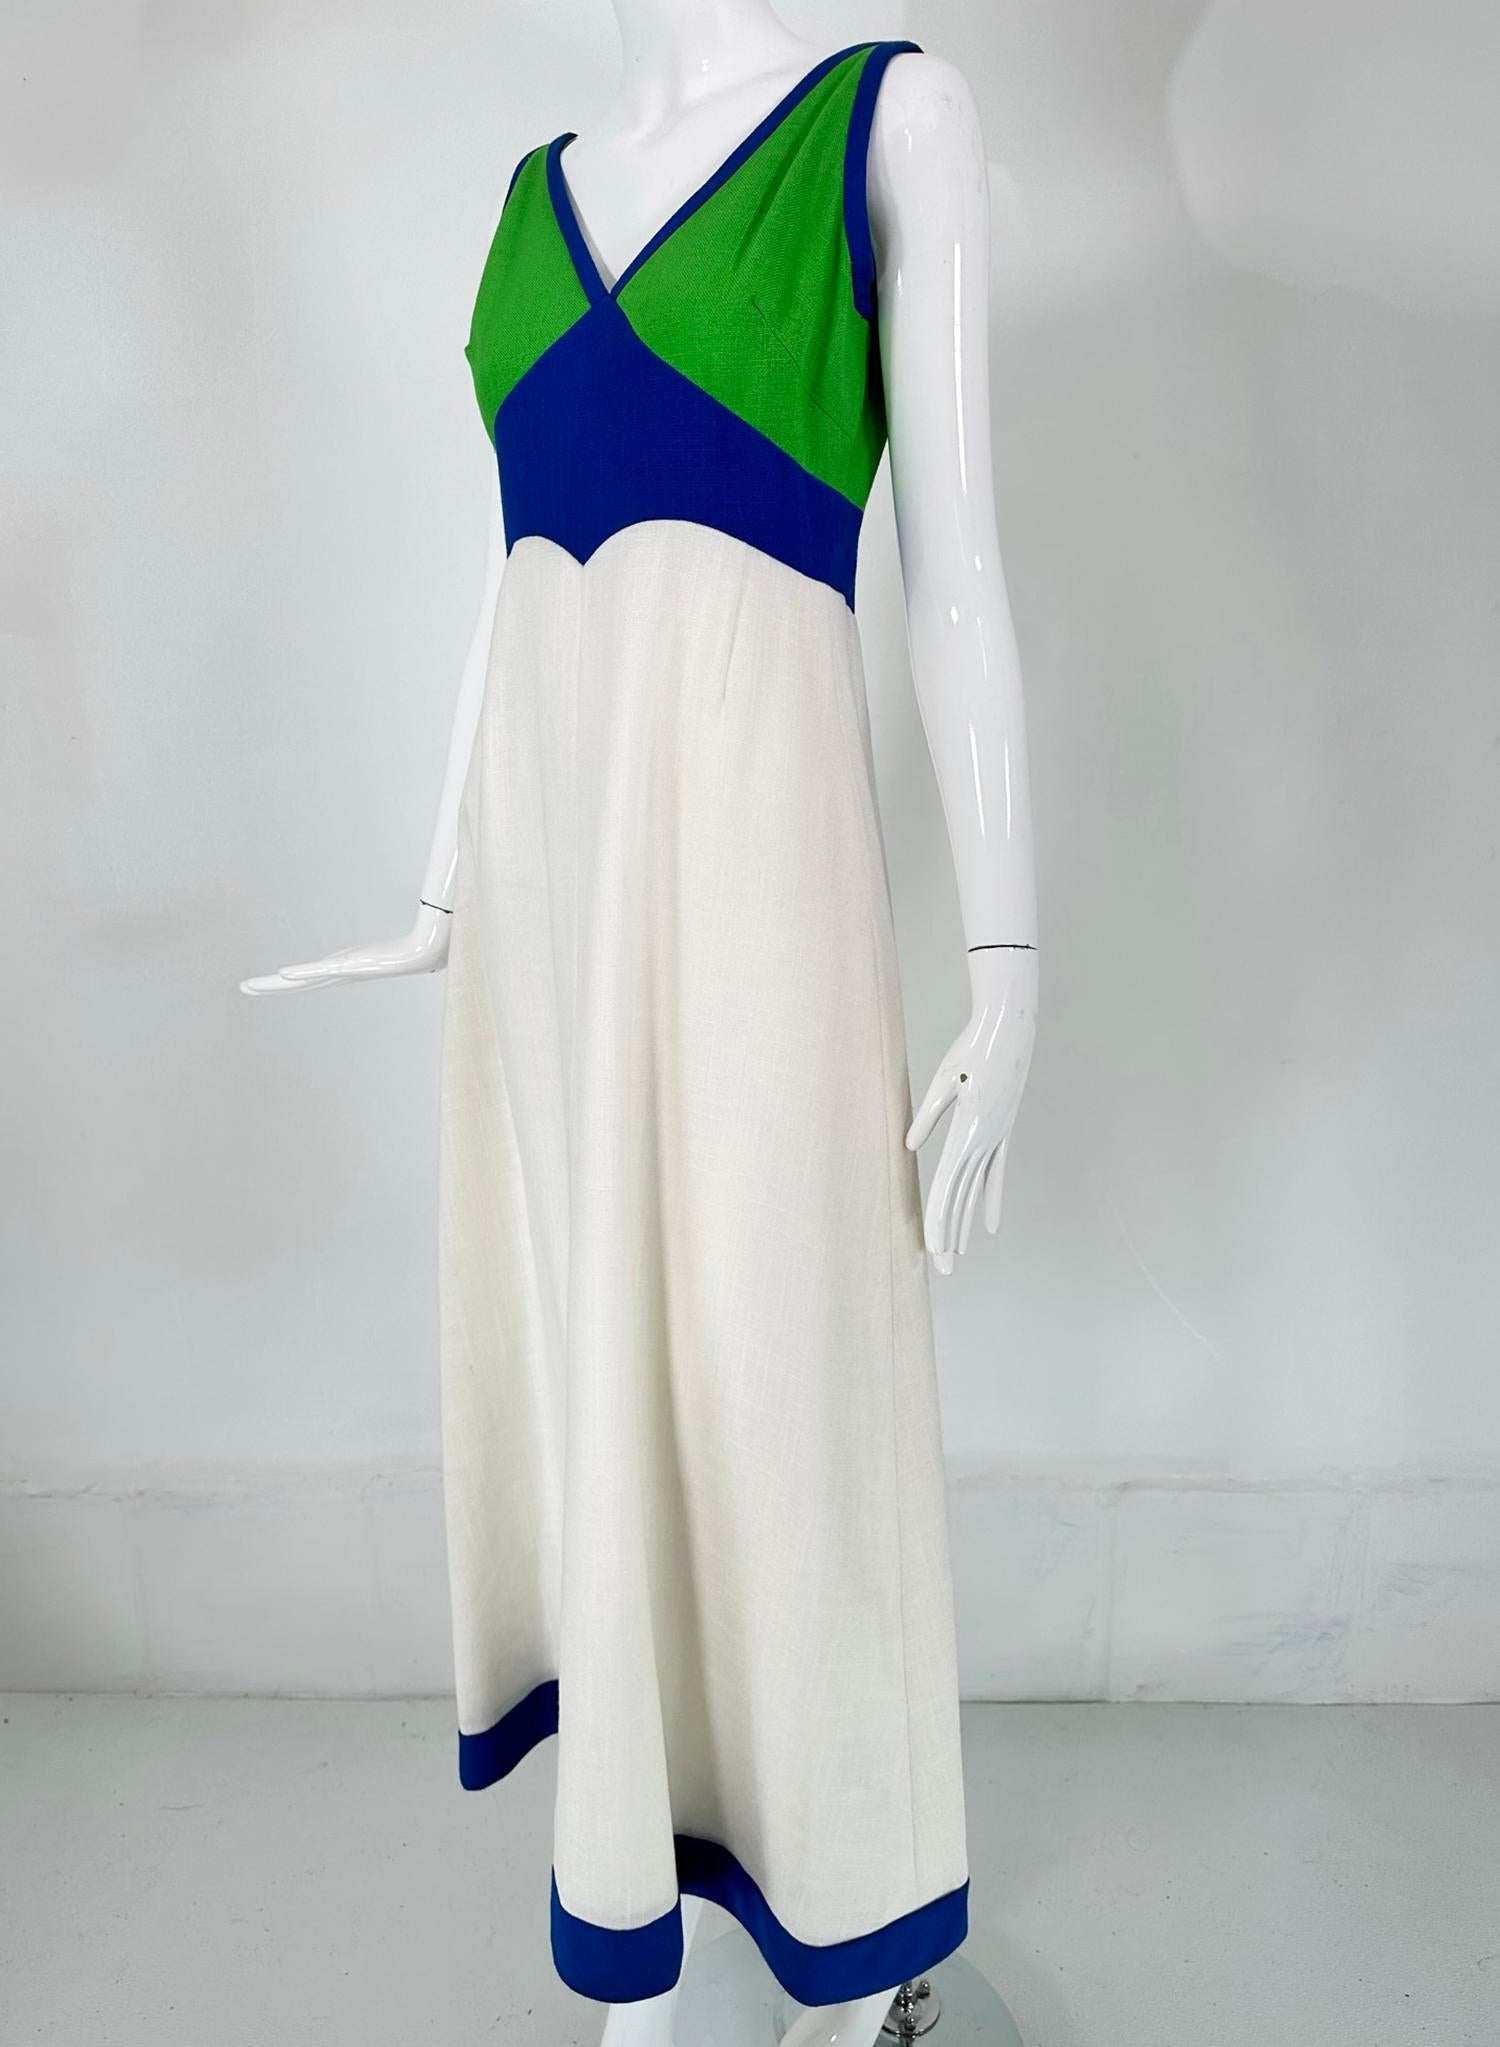 Shannon Rodgers for Jerry Silverman colour block linen maxi dress in bright green, marine blue & white. Classic 70s summer dress, sleeveless with a V neckline and an empire waist in marine blue. The long skirt is A line falling full at the hem which